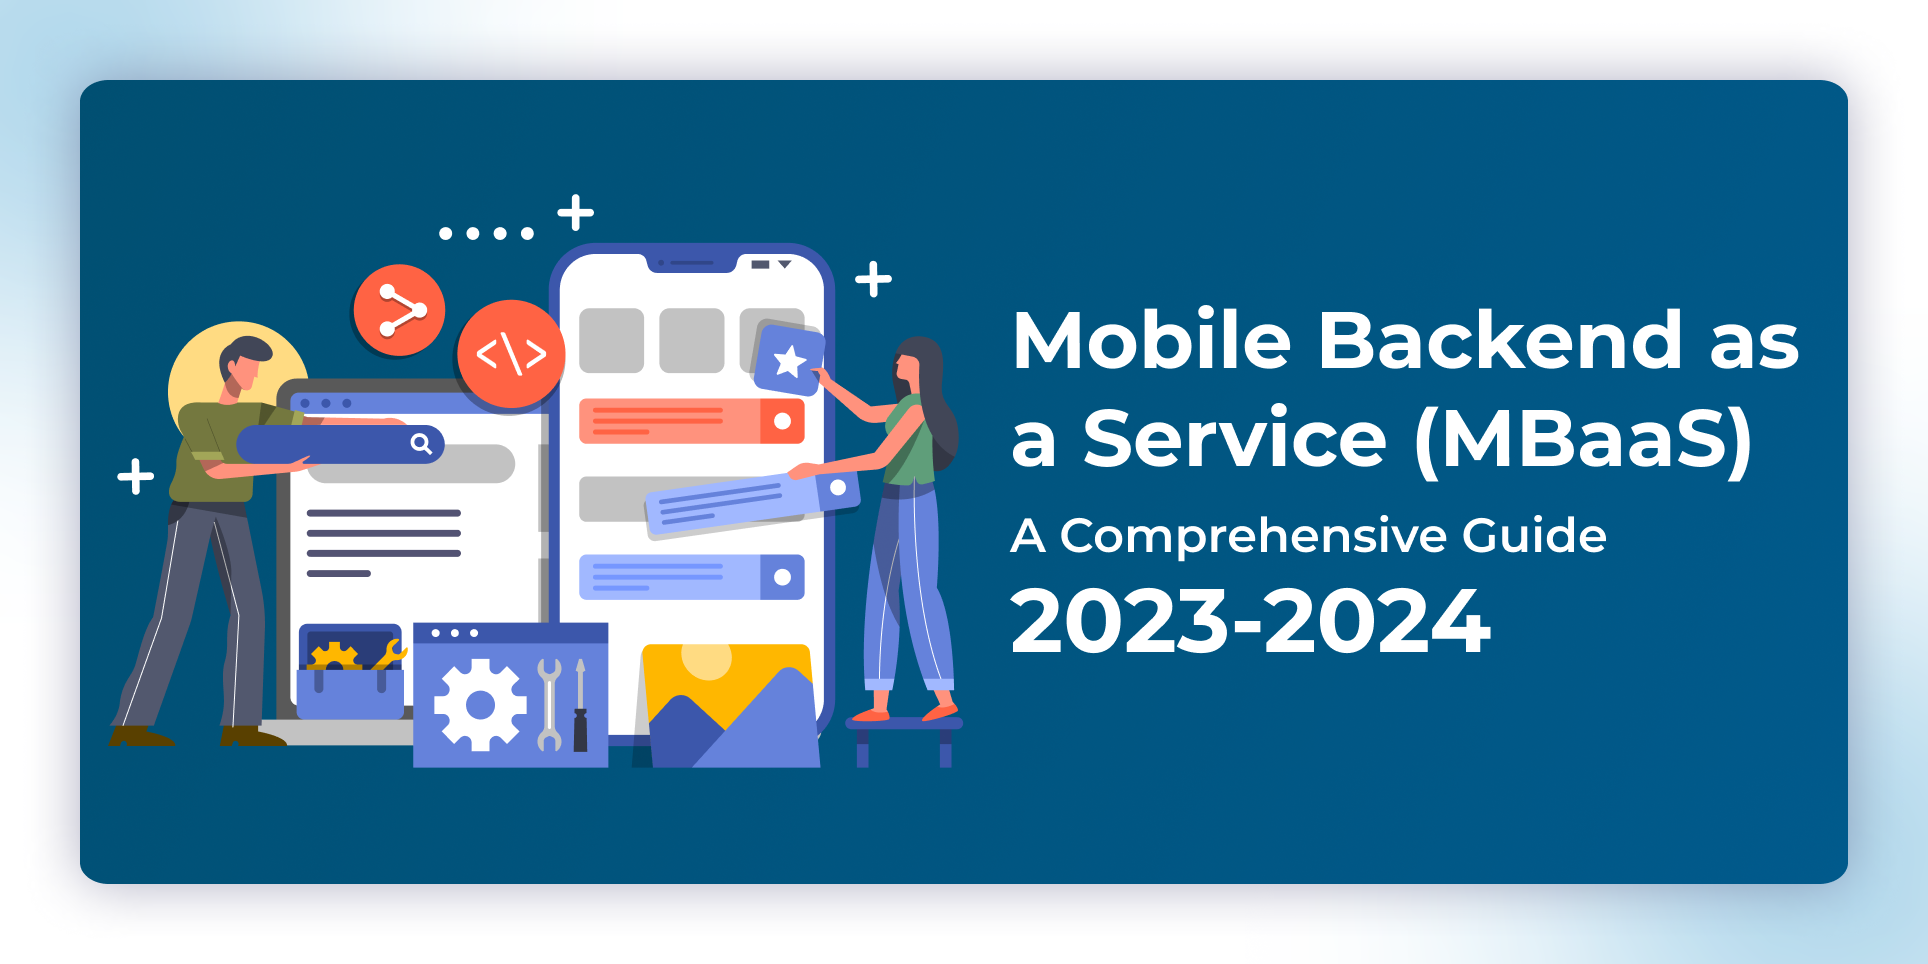 Mobile backend as a service (mbaas): a comprehensive guide 2023-2024